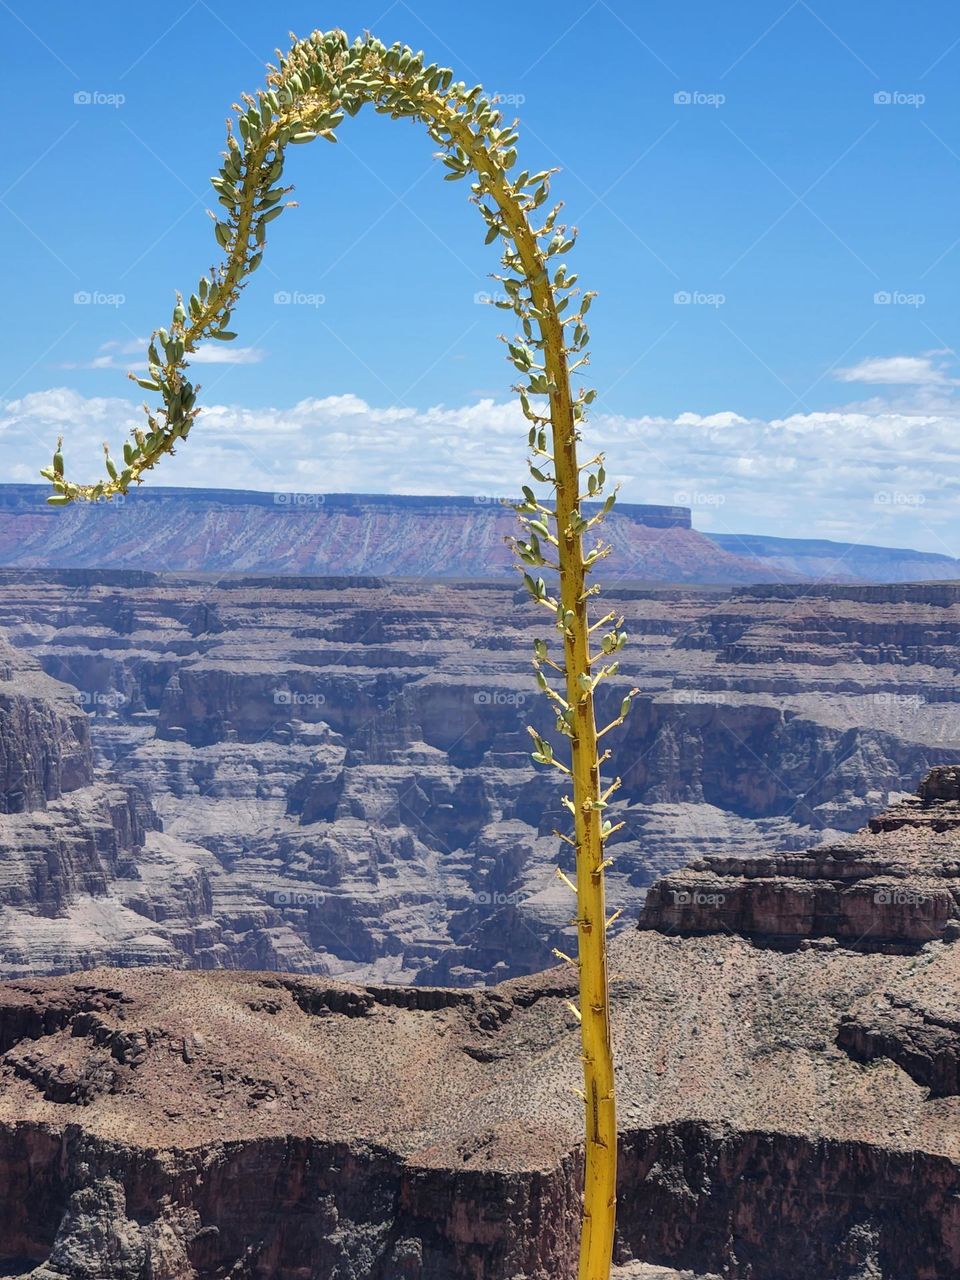 Blue Agave plant, overlooking the Grand Canyon